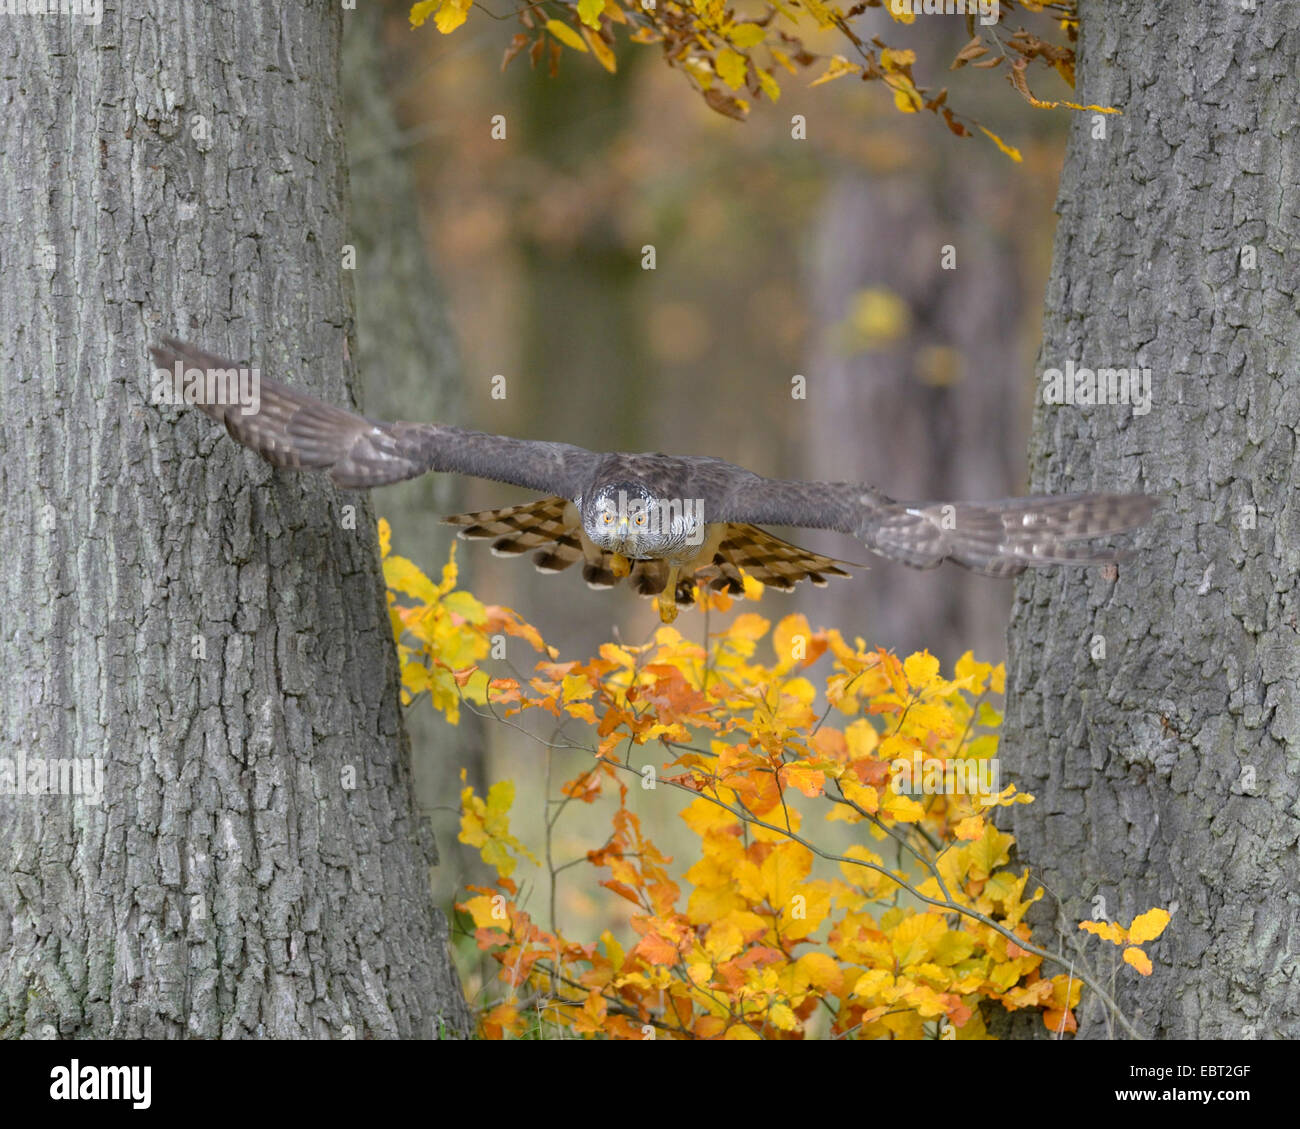 northern goshawk (Accipiter gentilis), adult female flying through two oaks in autumn colouration looking for prey, Germany, Baden-Wuerttemberg Stock Photo